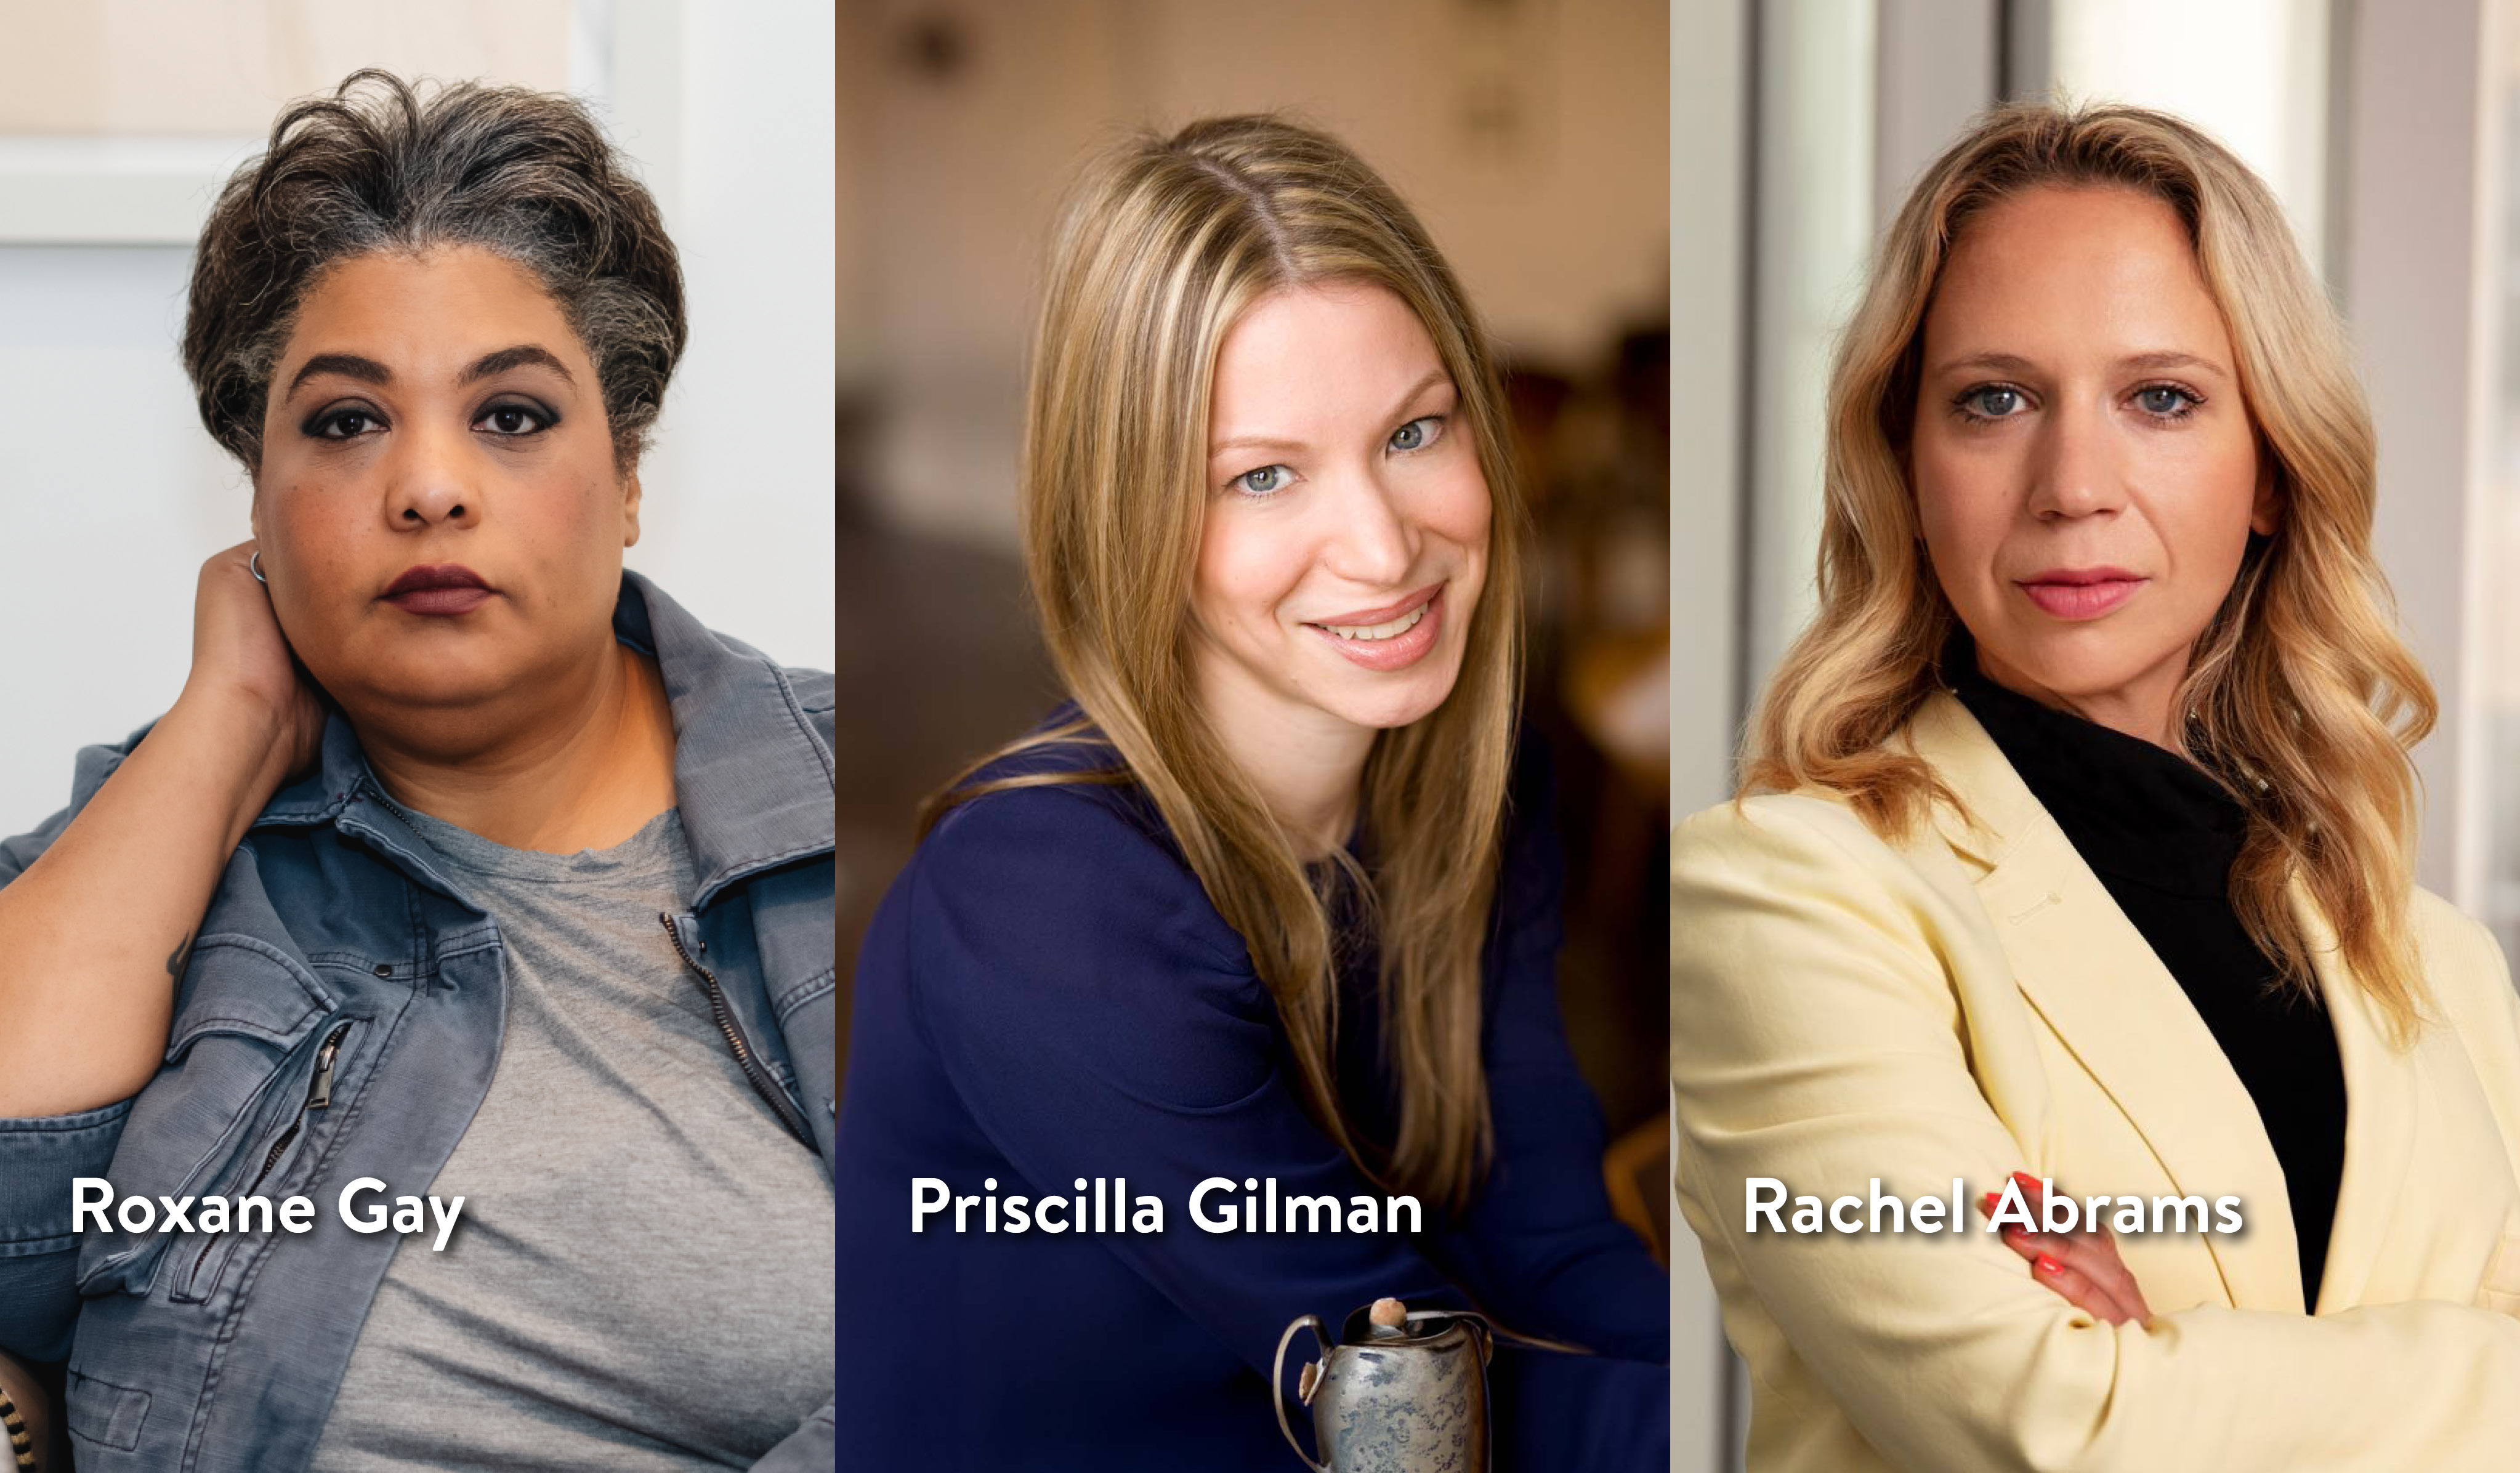 Start Women’s History Month with our virtual conversation with Roxane Gay, Priscilla Gilman, and Rachel Abrams!